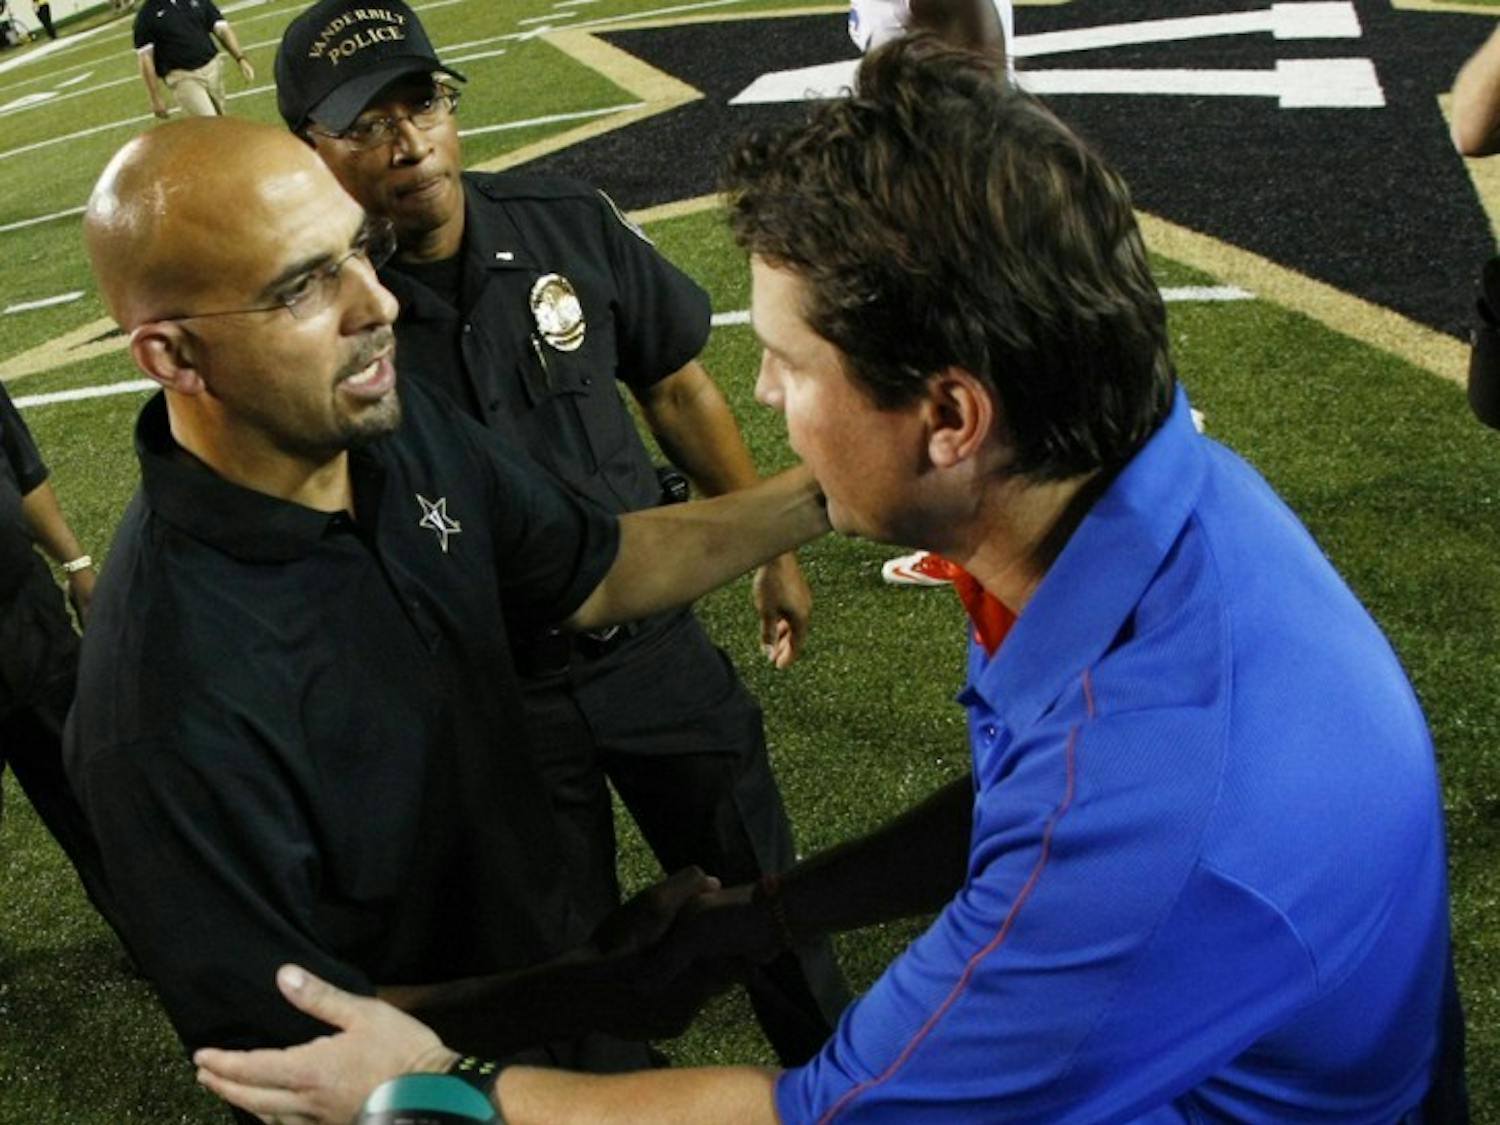 Coach Will Muschamp (right) shakes hands with Vanderbilt coach James Franklin. If Franklin accepts the Penn State opening, Thomas Holley's choice in schools may sway in favor of Florida.